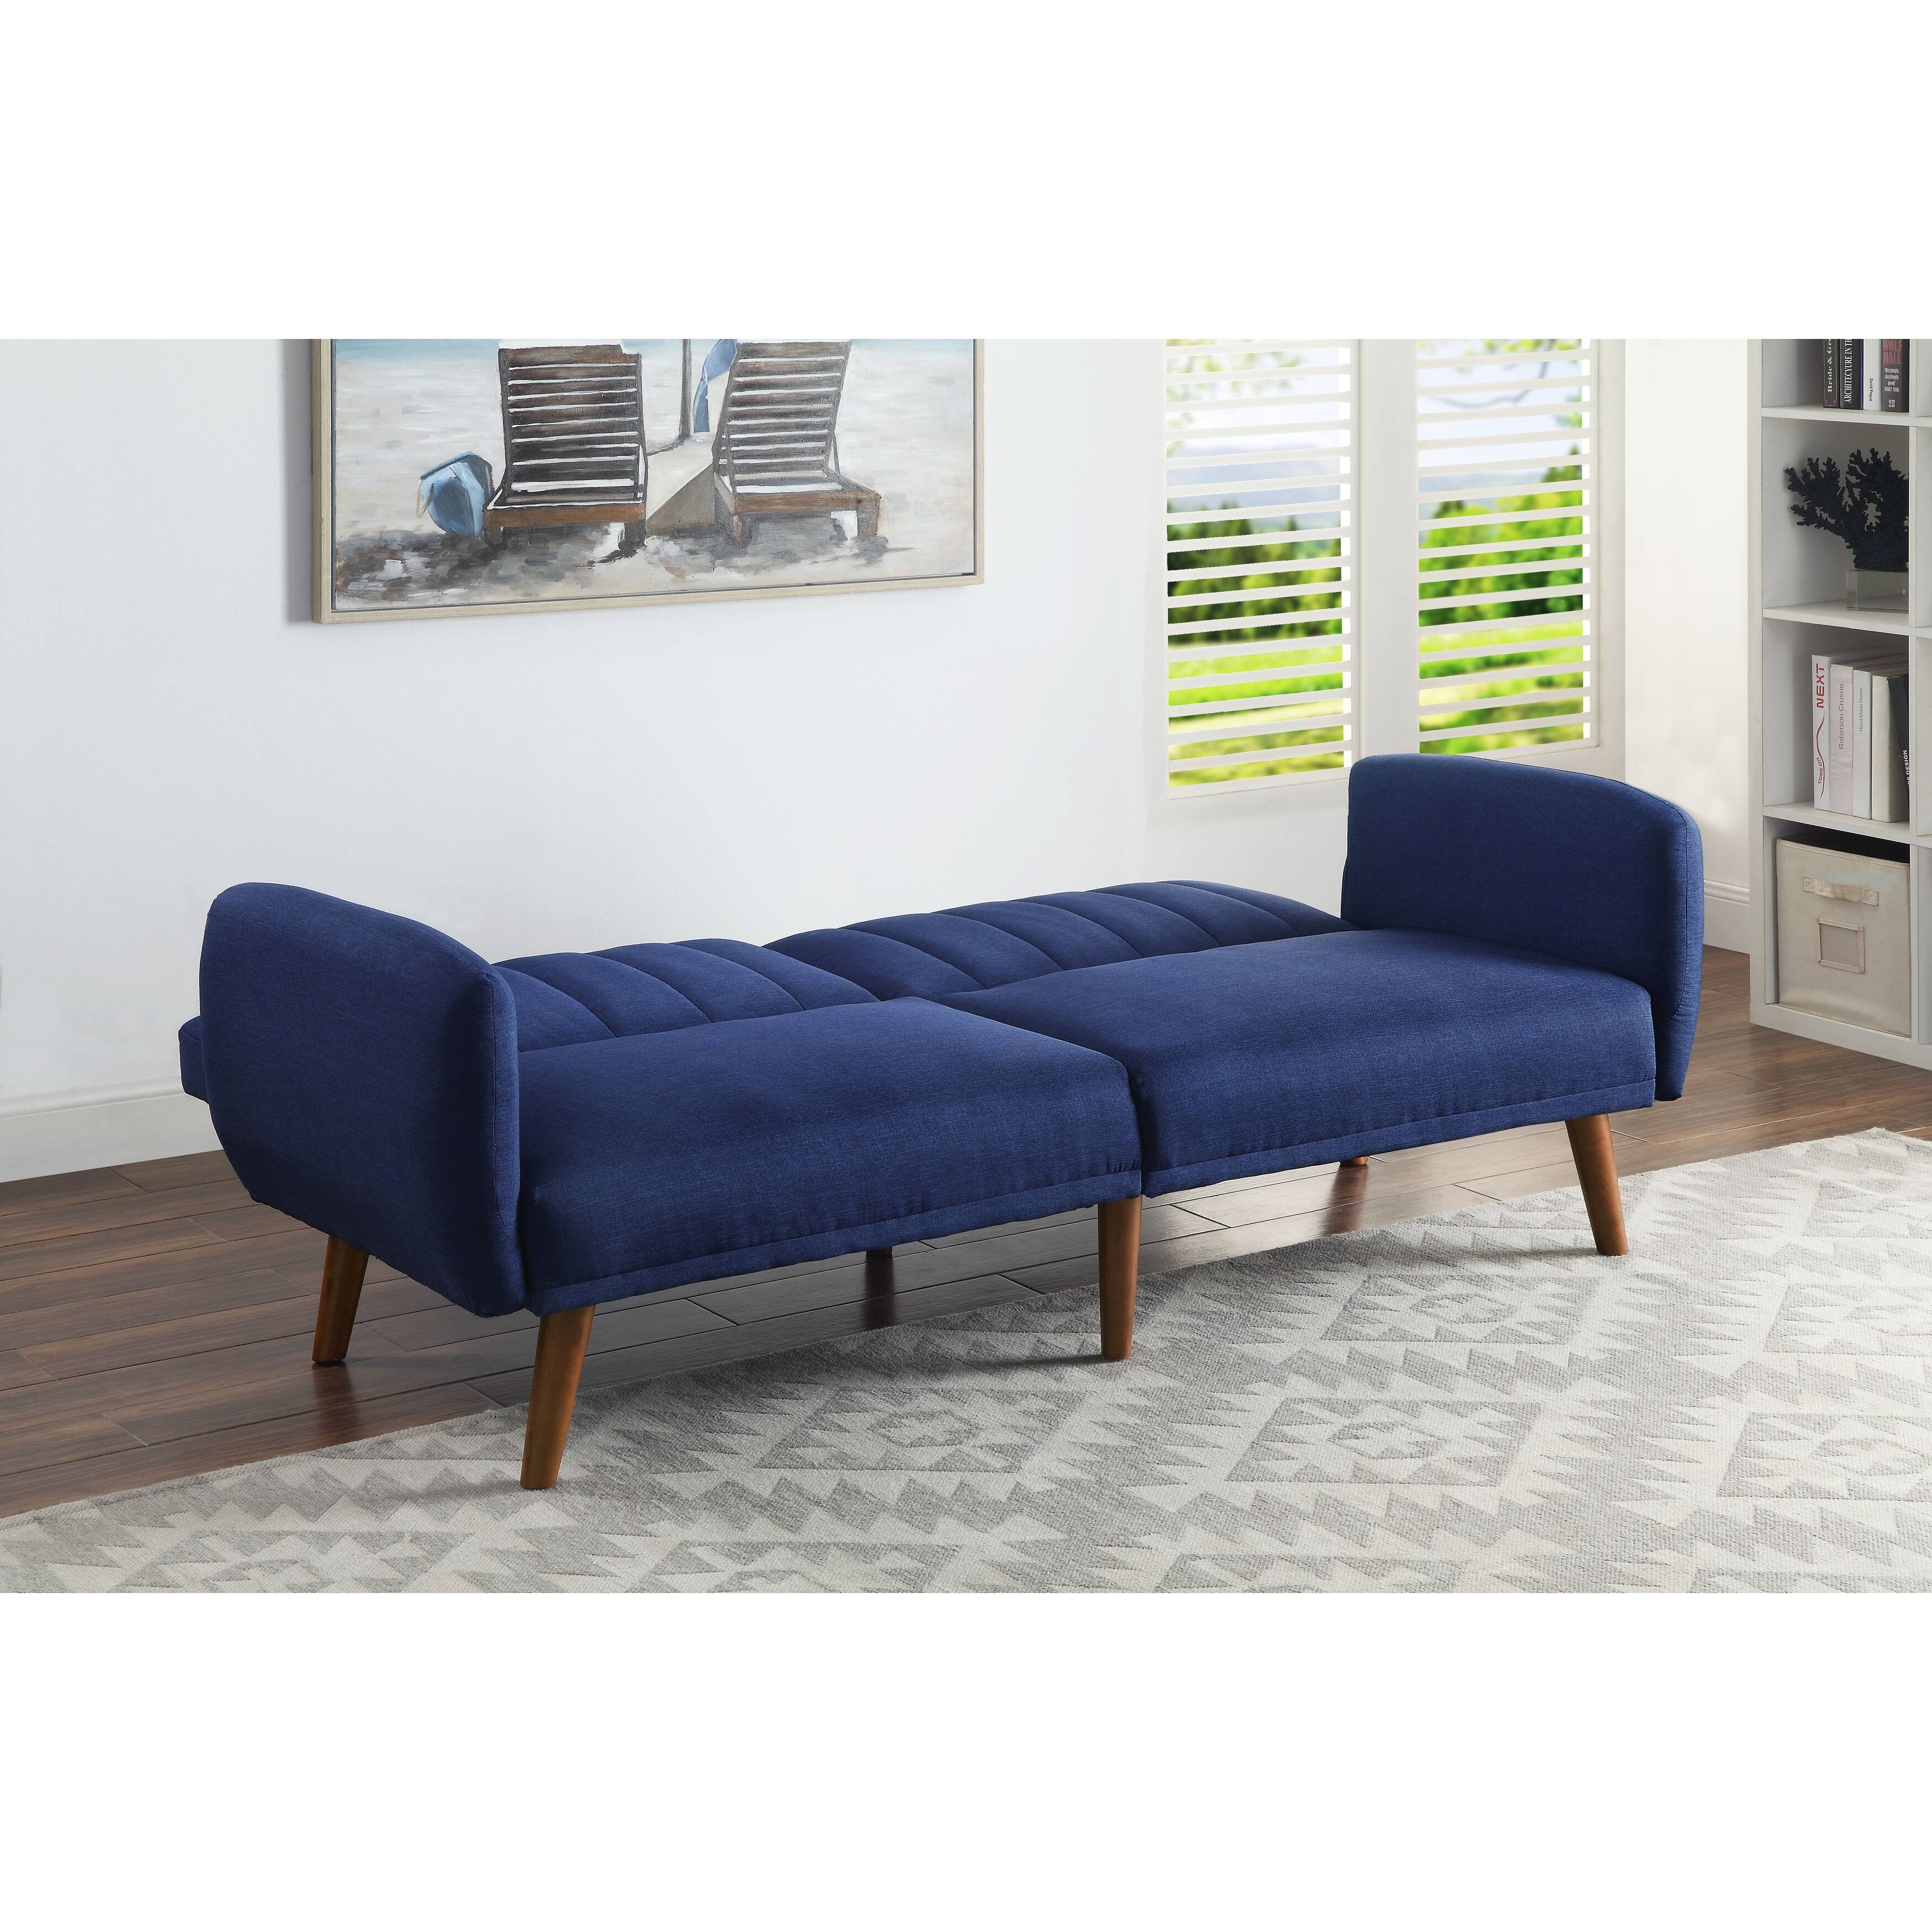 Modern Convertible Adjustable Sofa with Scrolled Arm 2 Seats Loveseat Walnut Finish Blue Linen